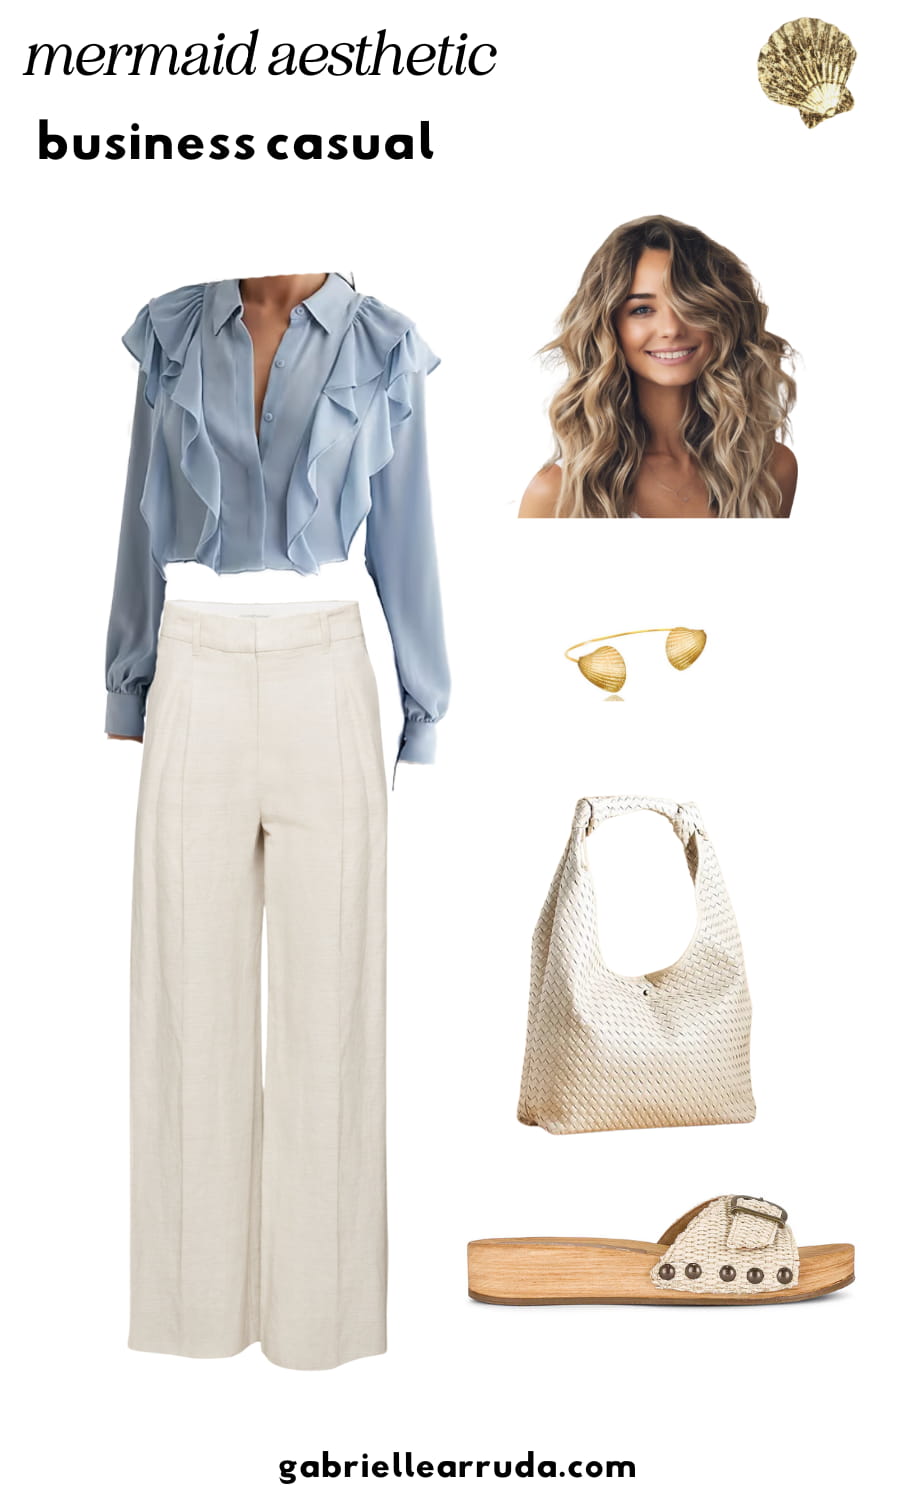 mermaid aesthetic for business casual outfit idea